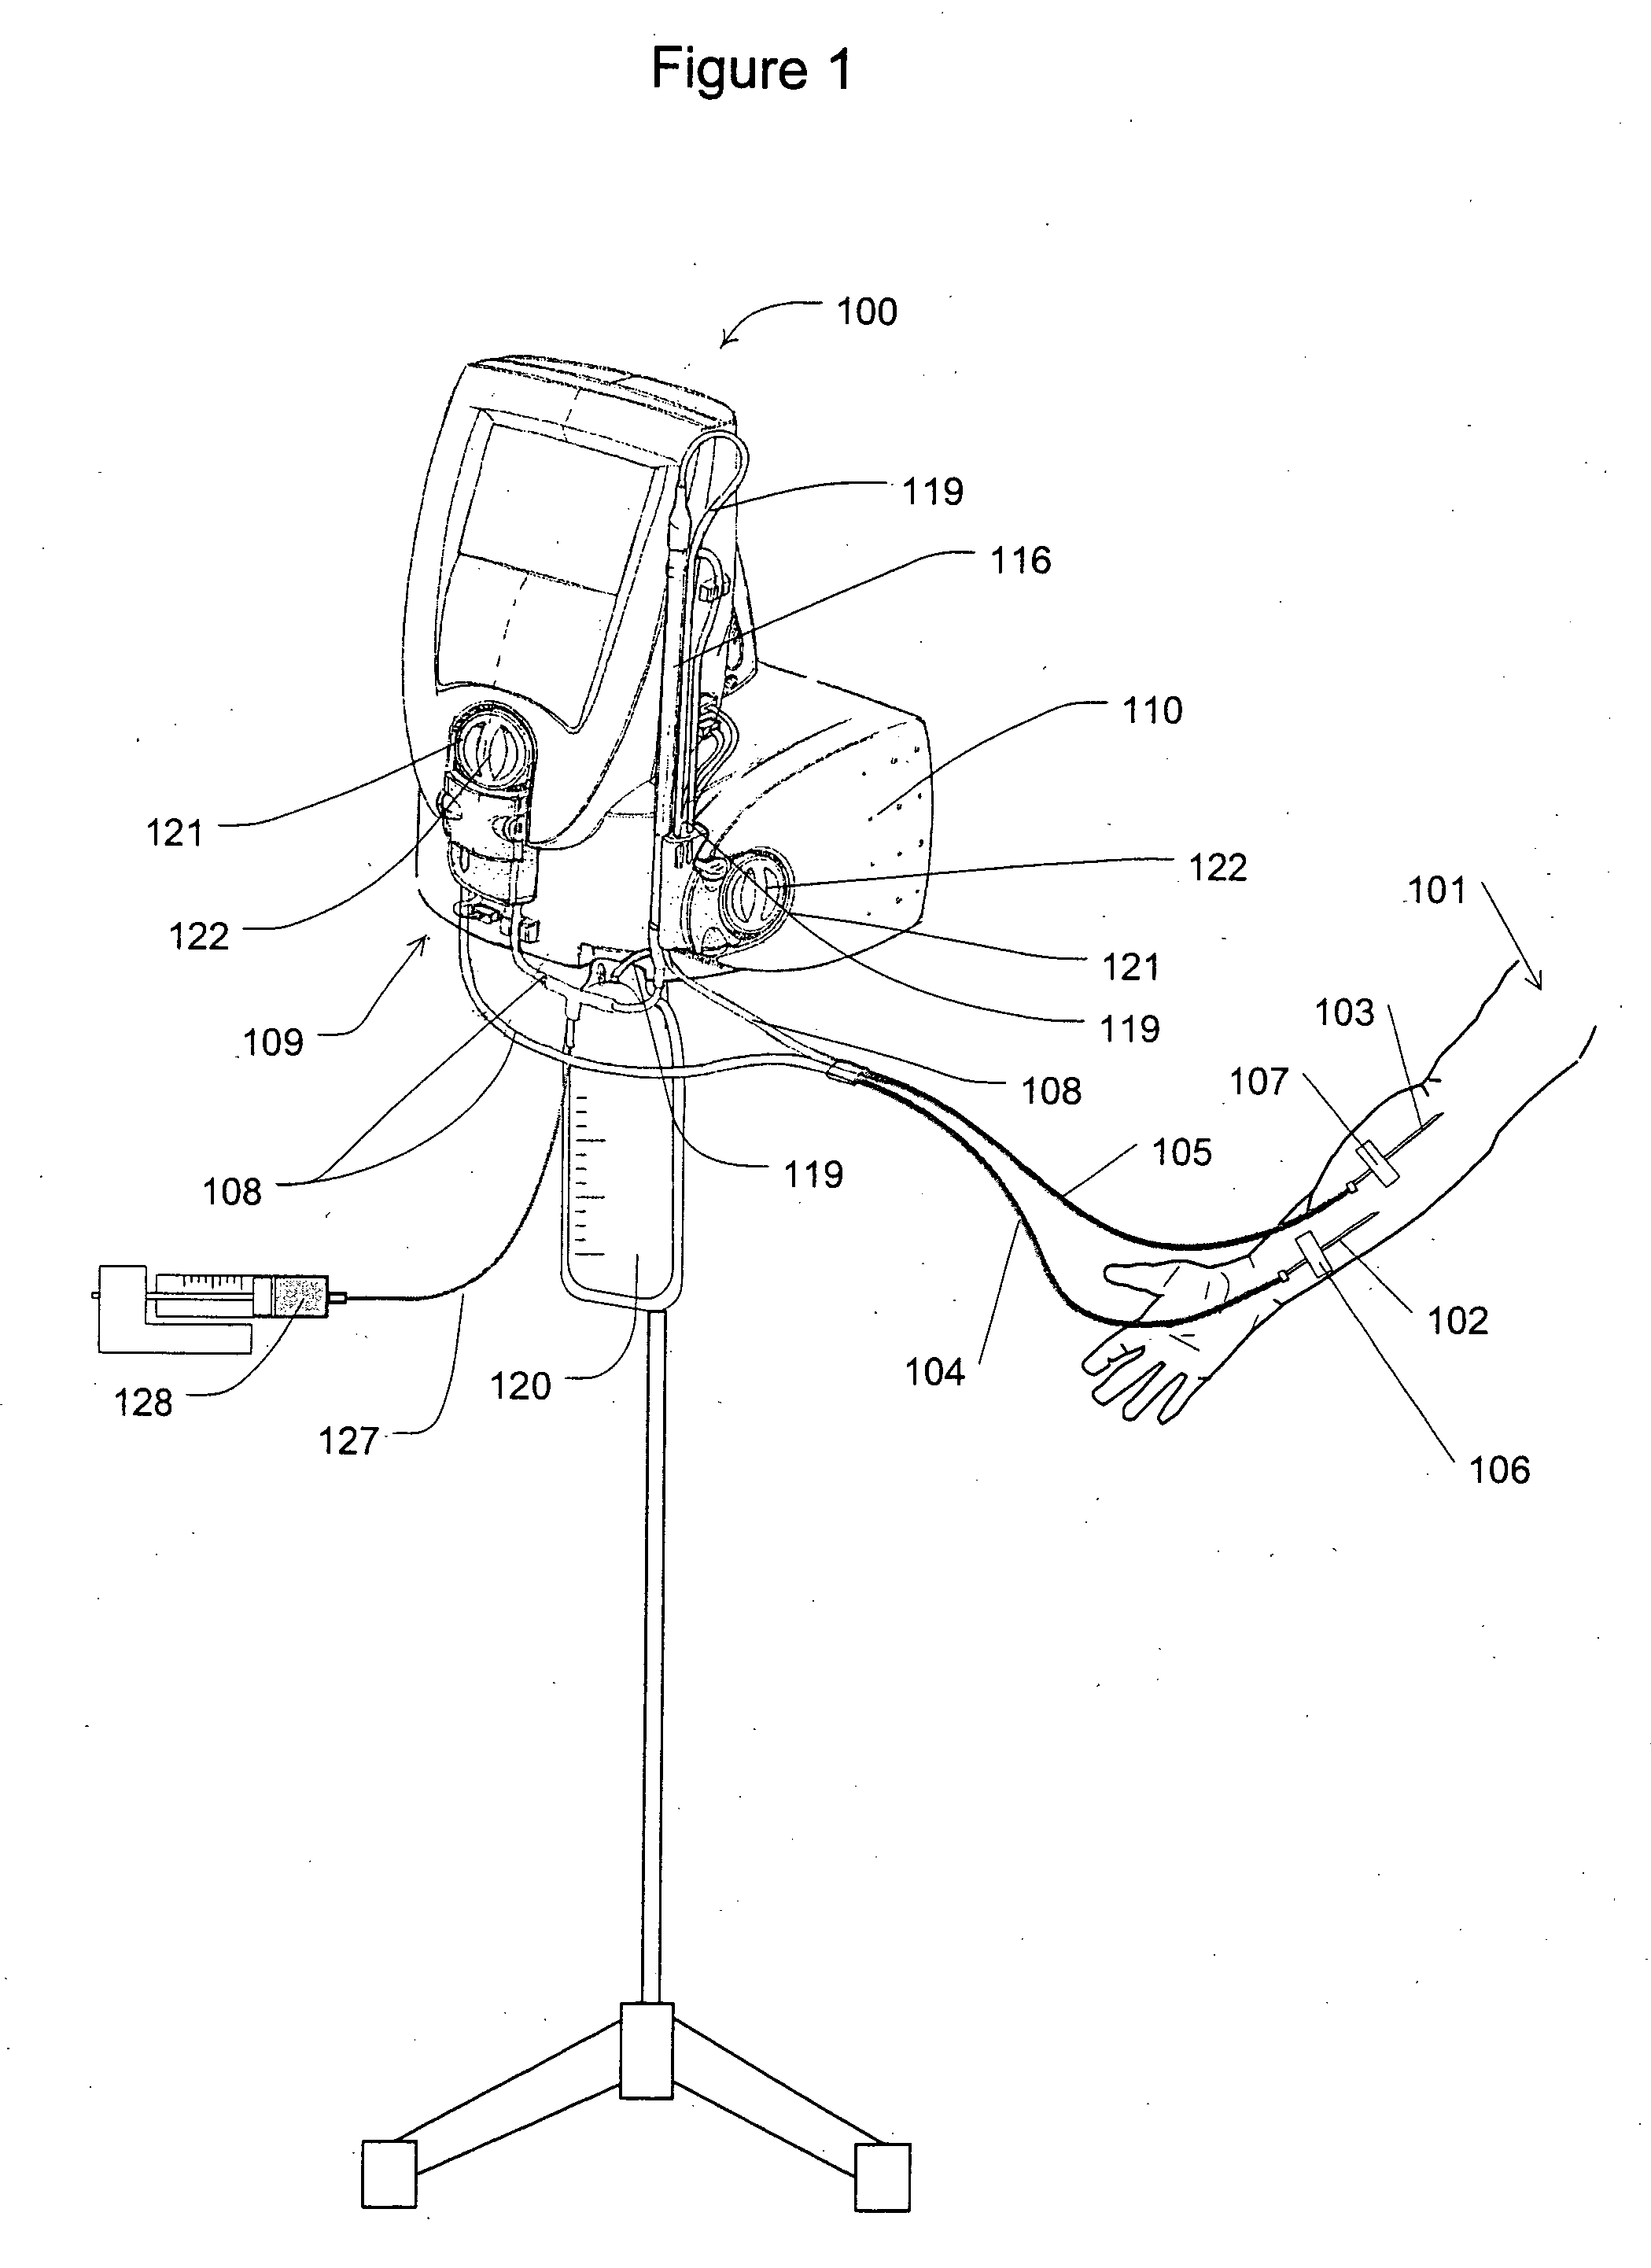 Blood pump having a disposable blood filter with integrated pressure sensors